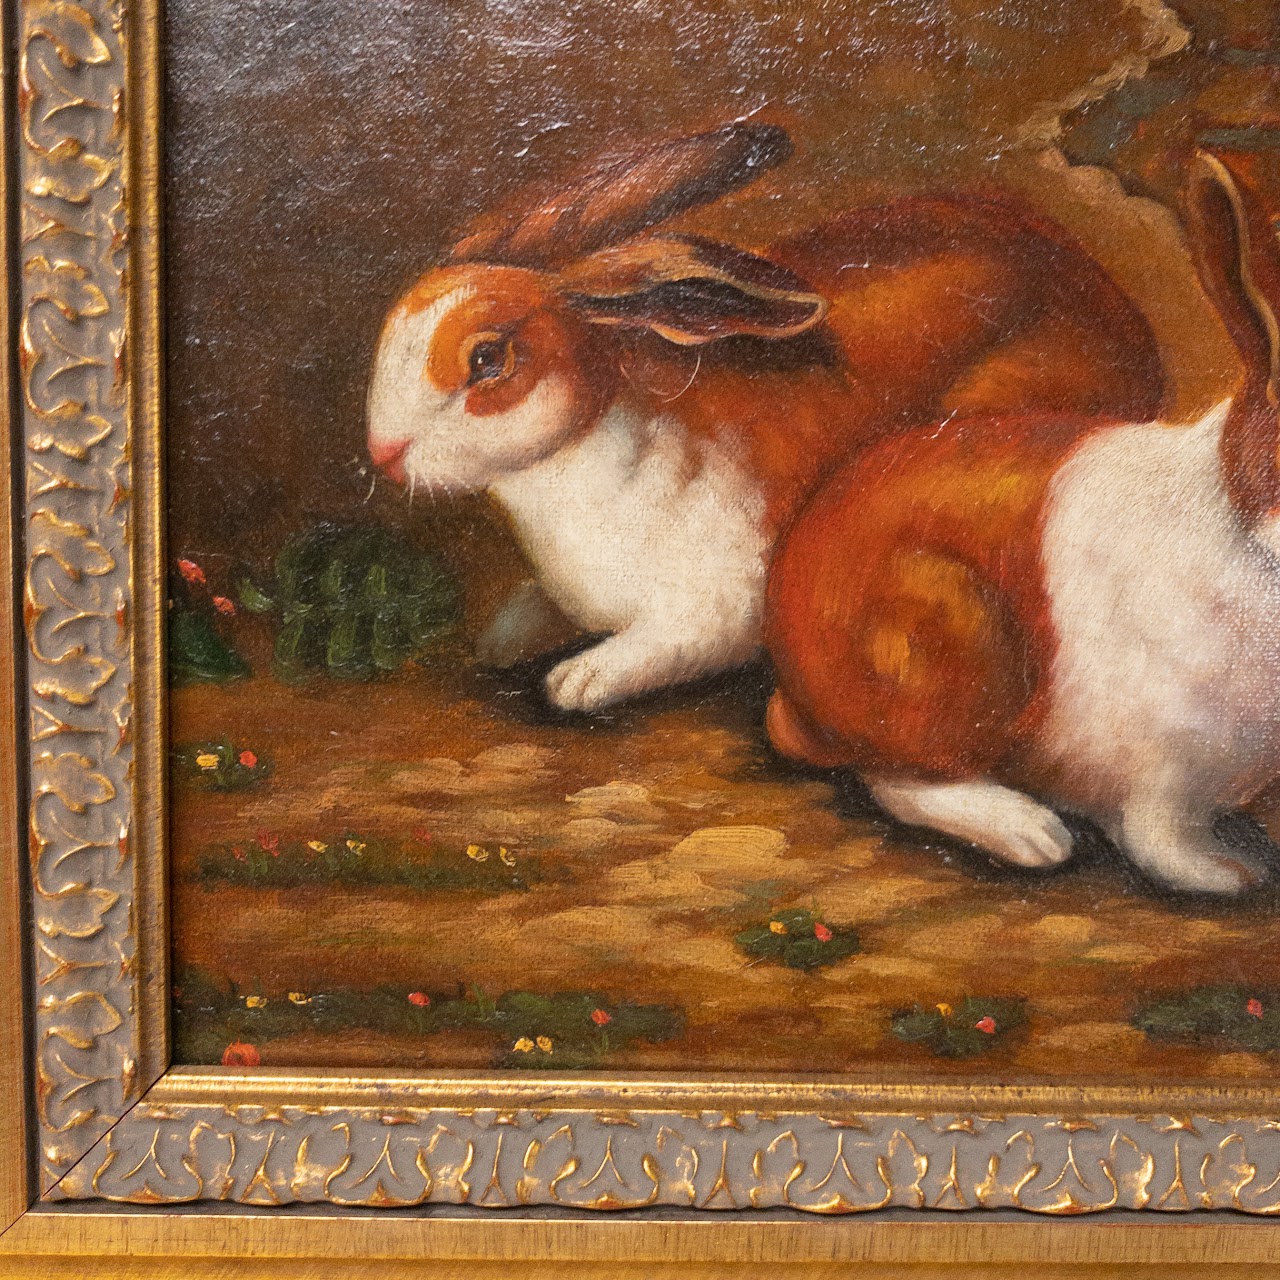 K. Richards Signed Bunny Oil Painting